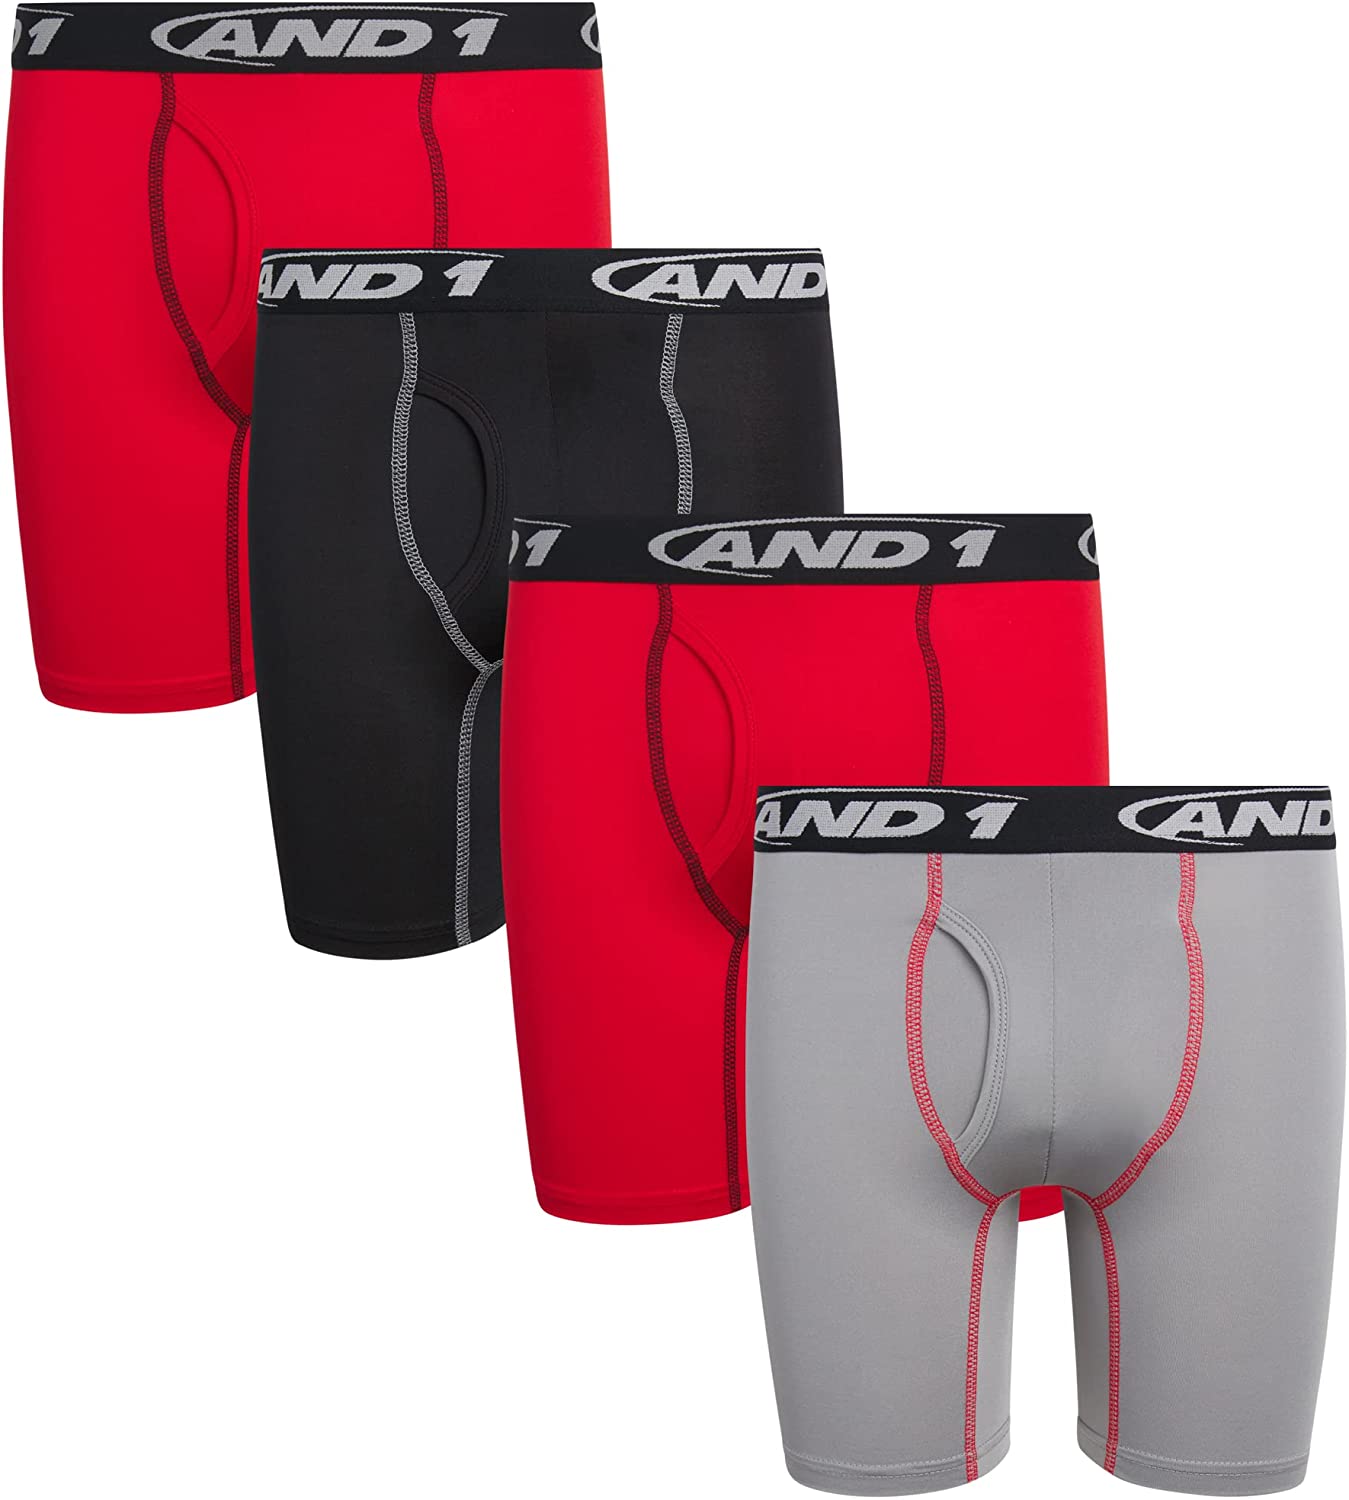 AND1 Men's Underwear - Performance Compression Boxer Briefs with